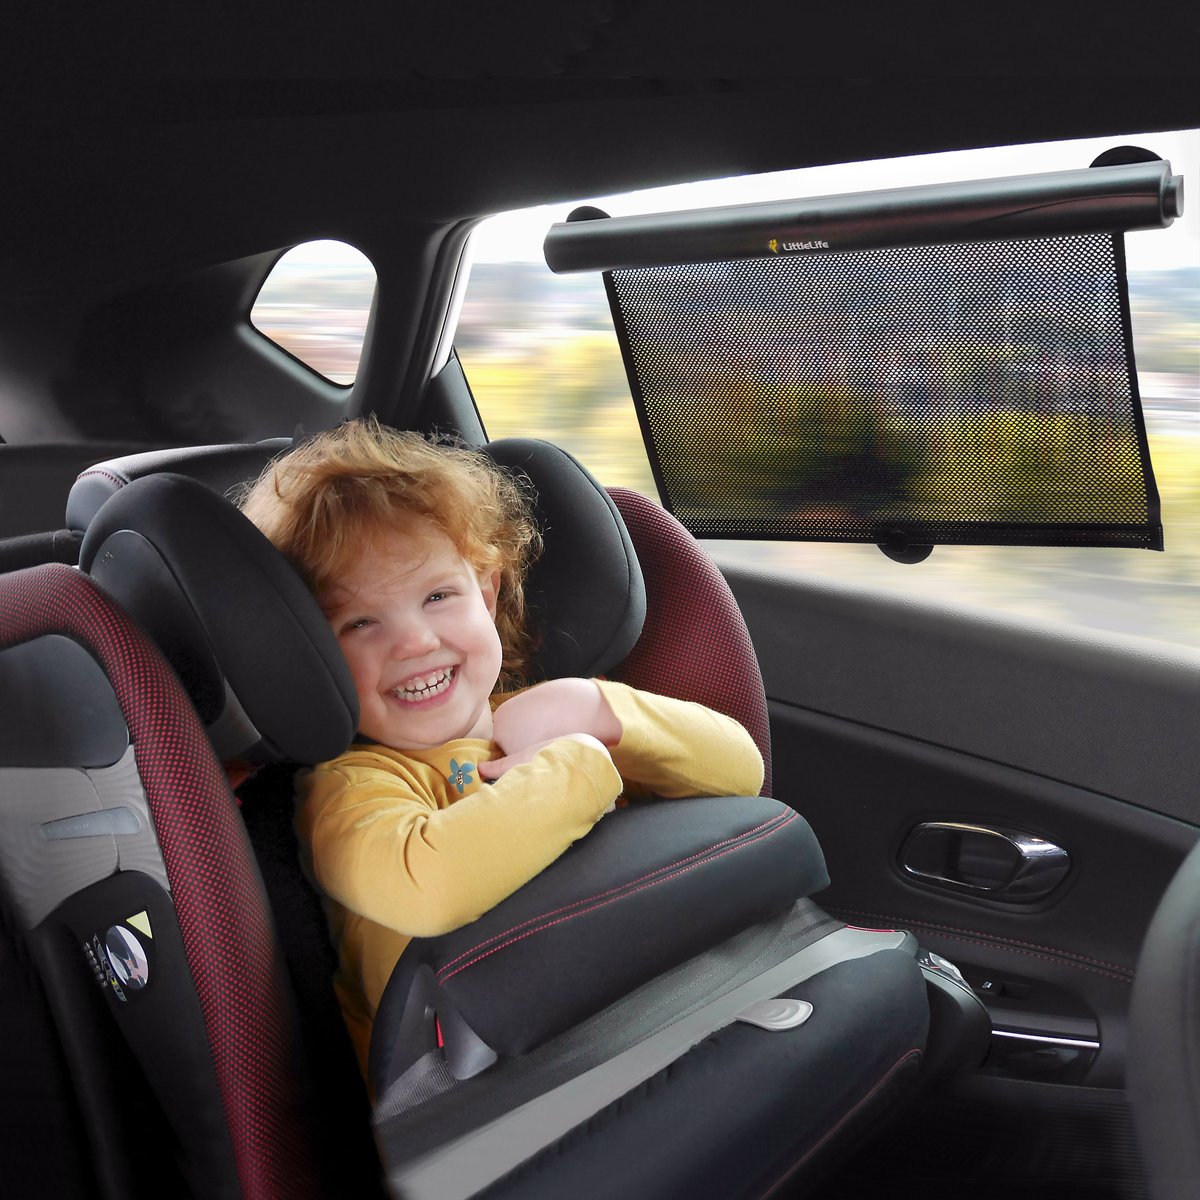 Keep your little ones protected from the sun while on your way to exciting summer days out.☀️ These car sun shades are the perfect way to keep glare out of your little passengers faces during car journeys. littlelife.com/products/trave… #carshades #caraccessories #littlelifeuk